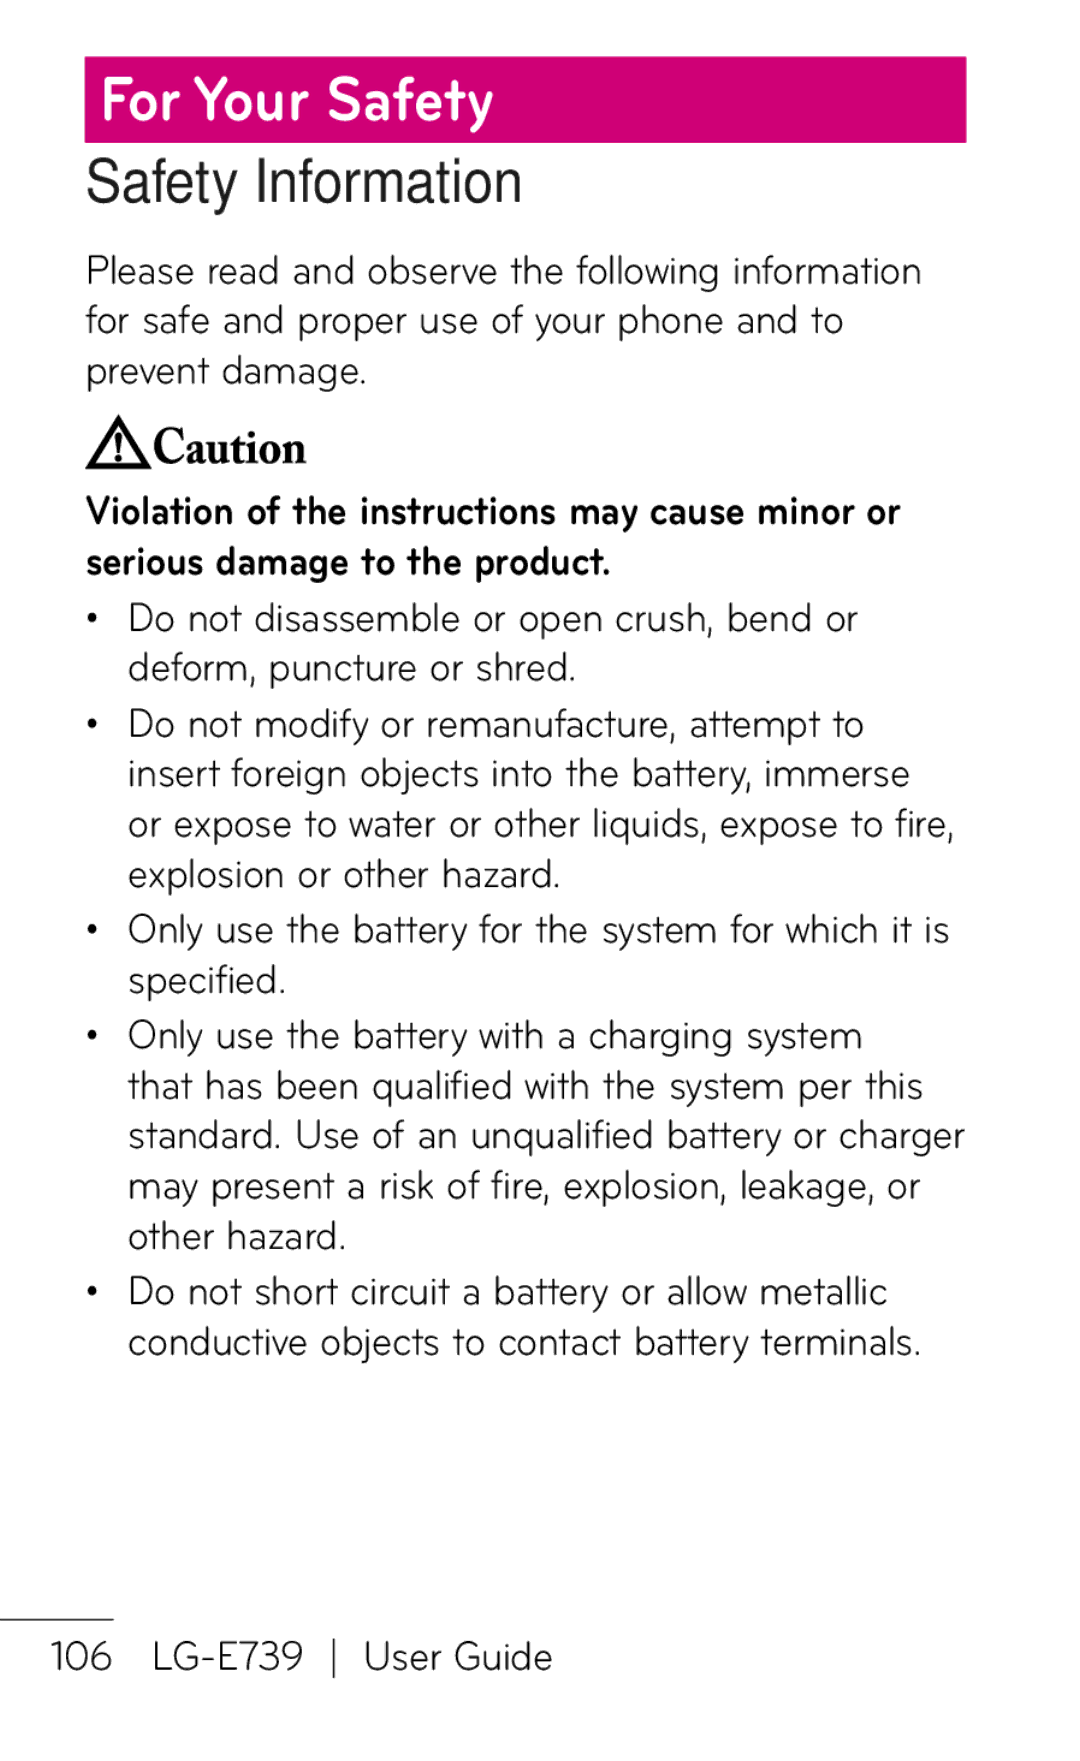 LG Electronics E739 manual For Your Safety, Safety Information 